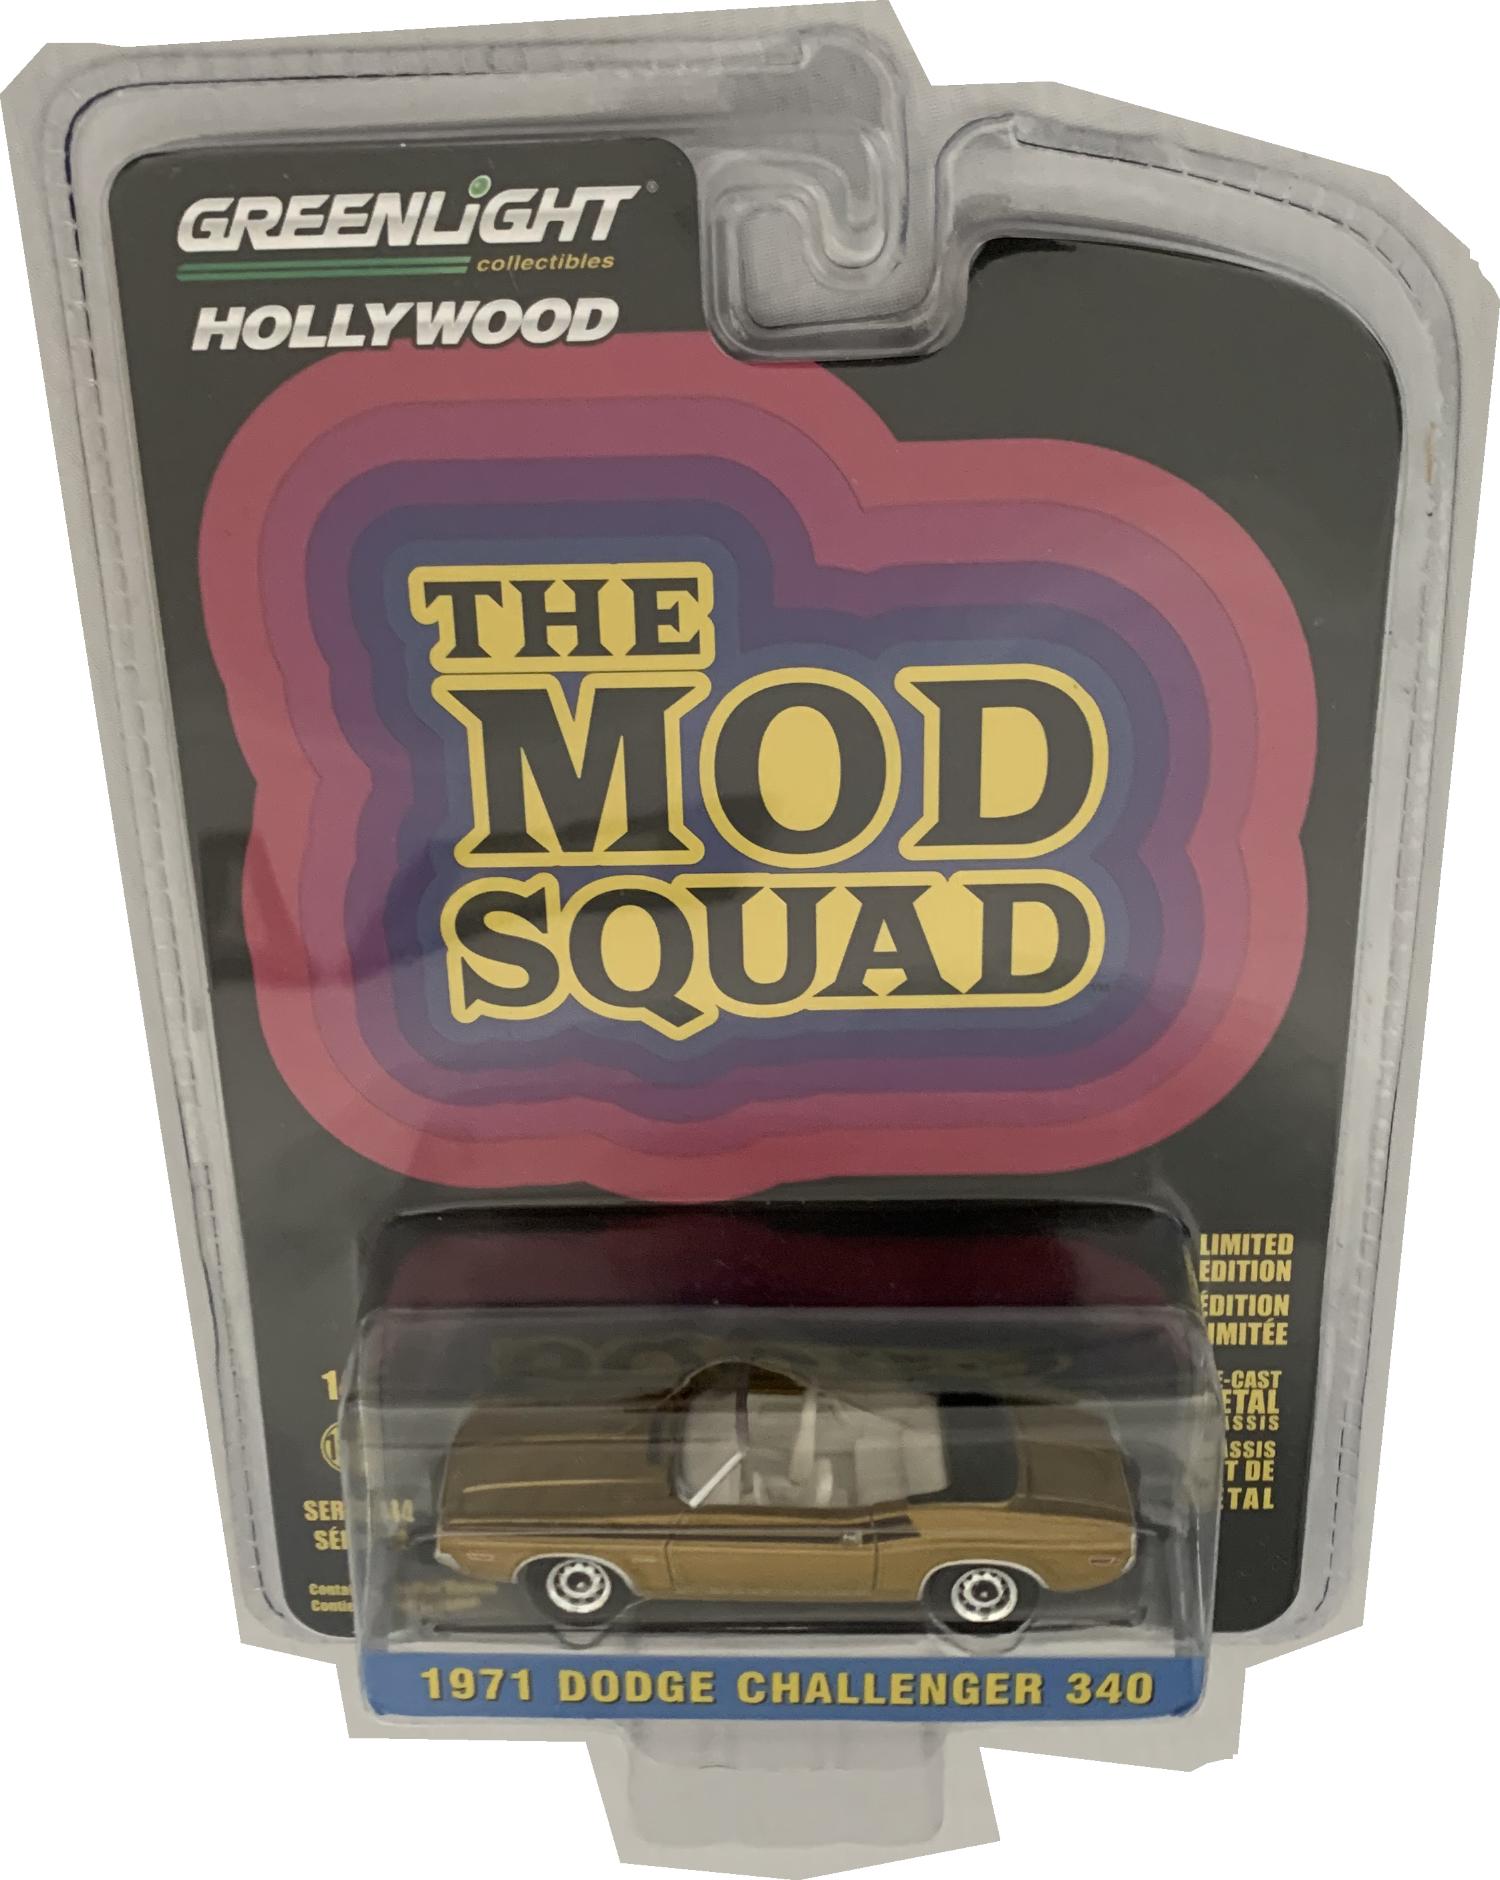 The Mod Squad 1971 Dodge Challenger 340 in gold 1:64 scale model from Greenlight, limited edition